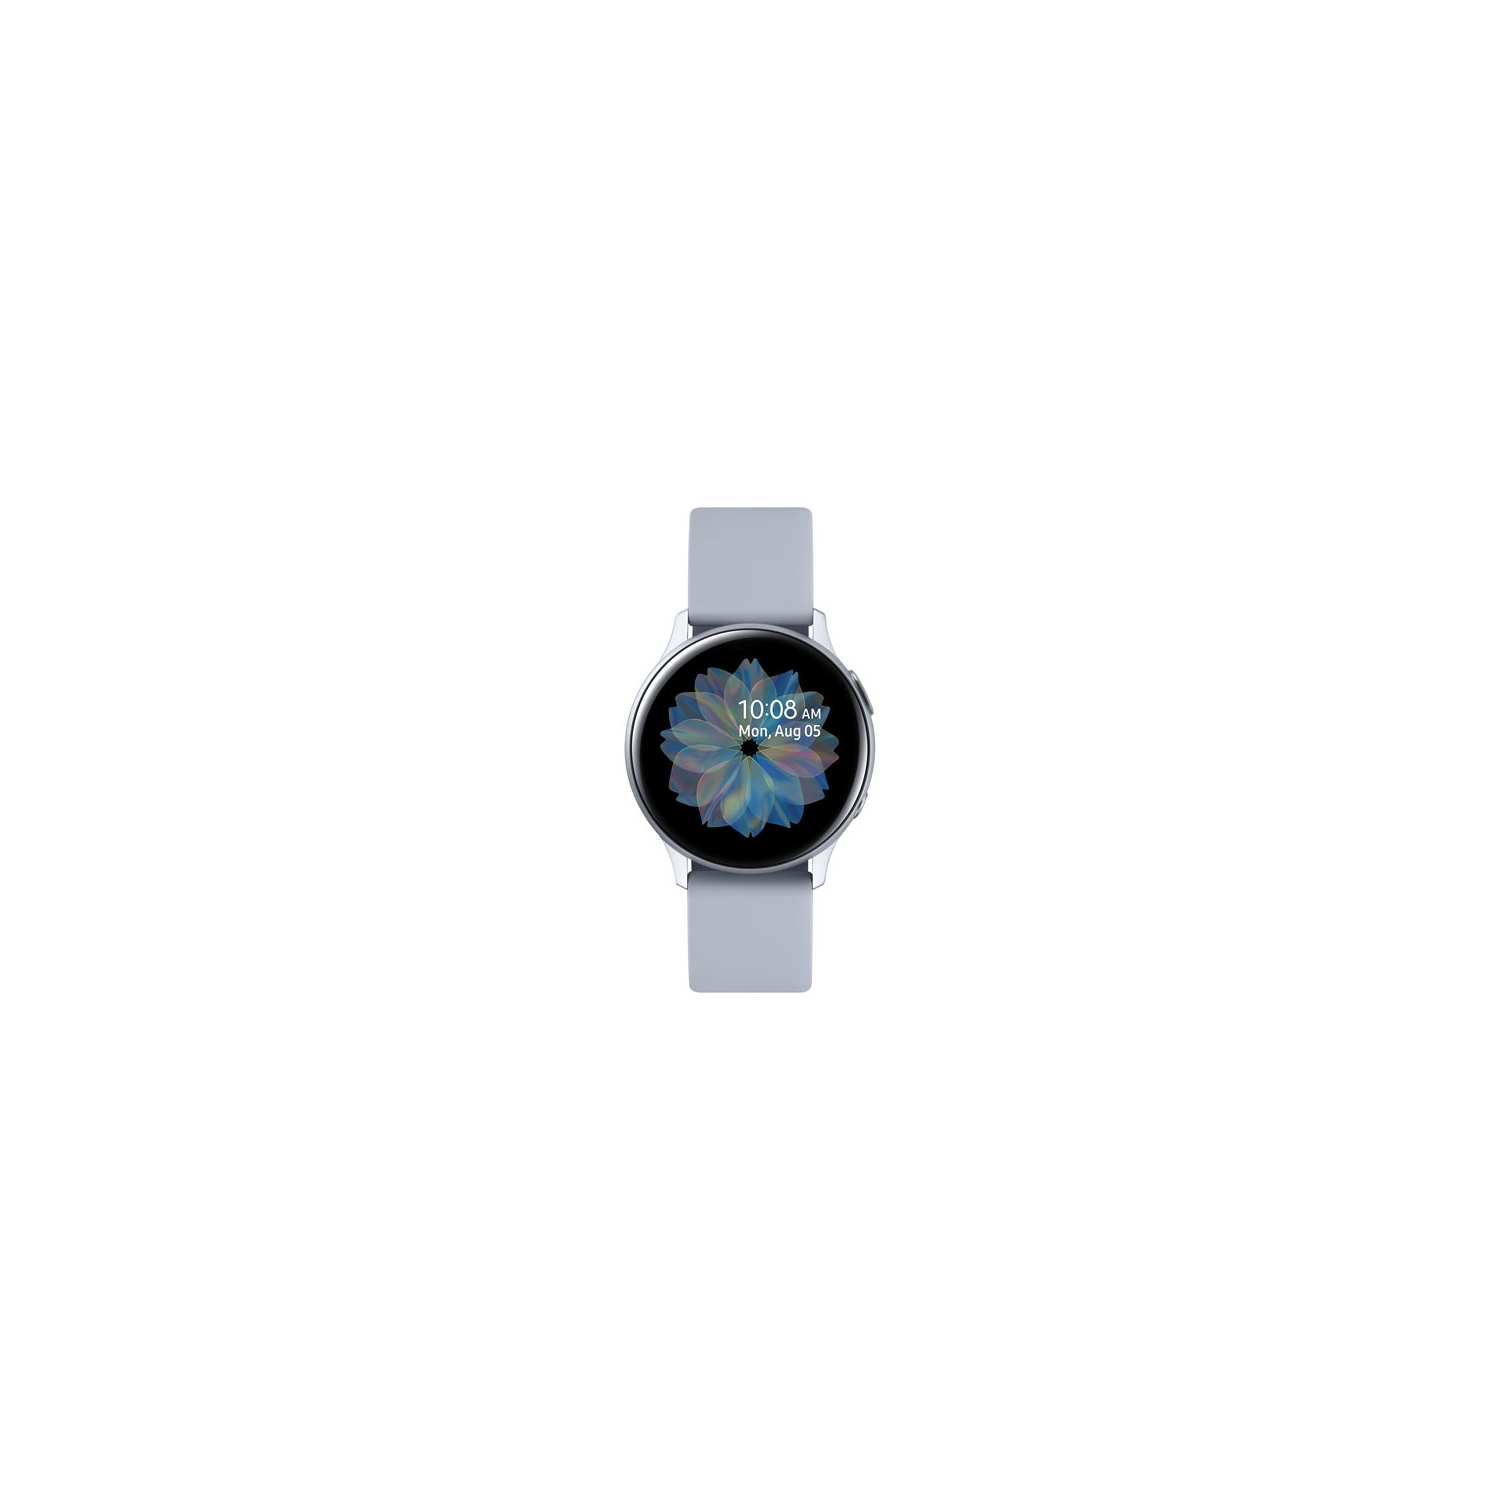 Refurbished (Good) - Samsung Galaxy Watch Active2 40mm Smartwatch with Heart Rate Monitor - Aluminum Silver